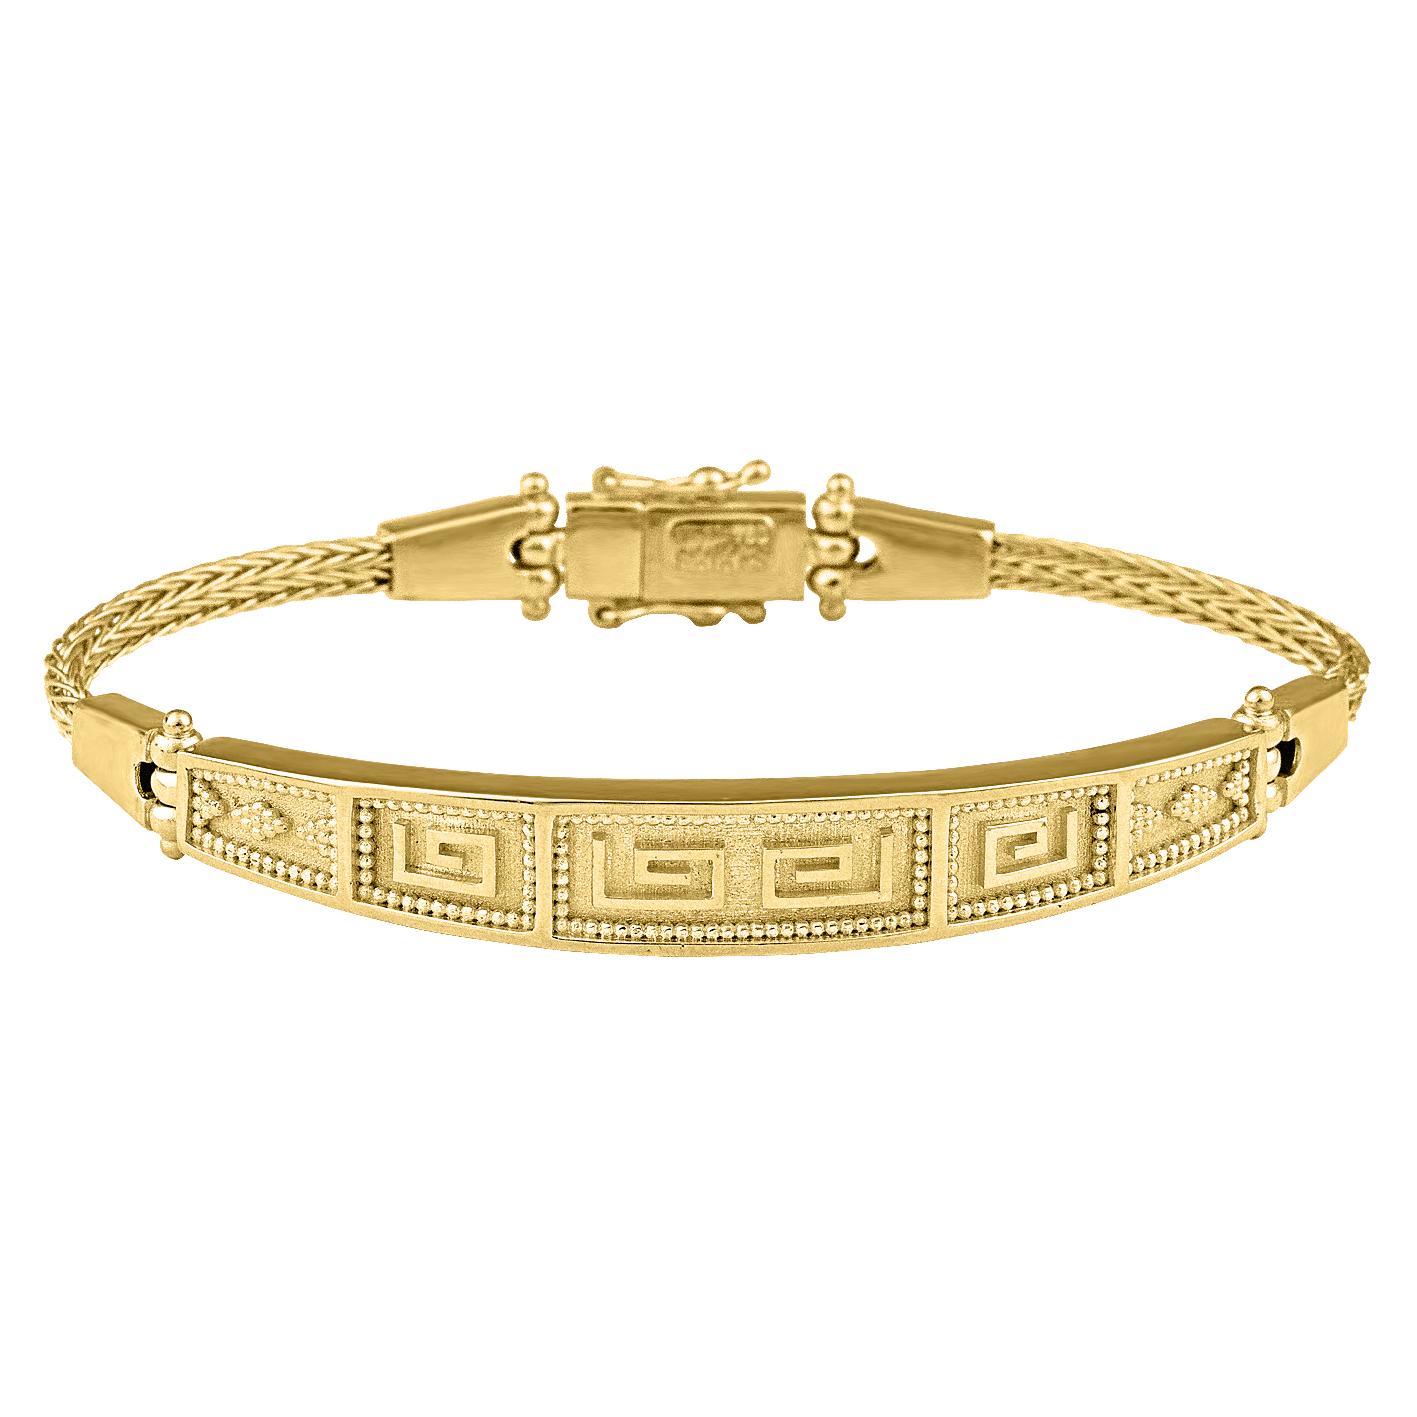 S.Georgios designer bracelet in solid yellow gold 18 karats all handmade with the Greek Key design, the symbol of eternal life. The Bracelet is custom made and has beautiful granulation work and hand-knitted rope parts. The clasp has second-level